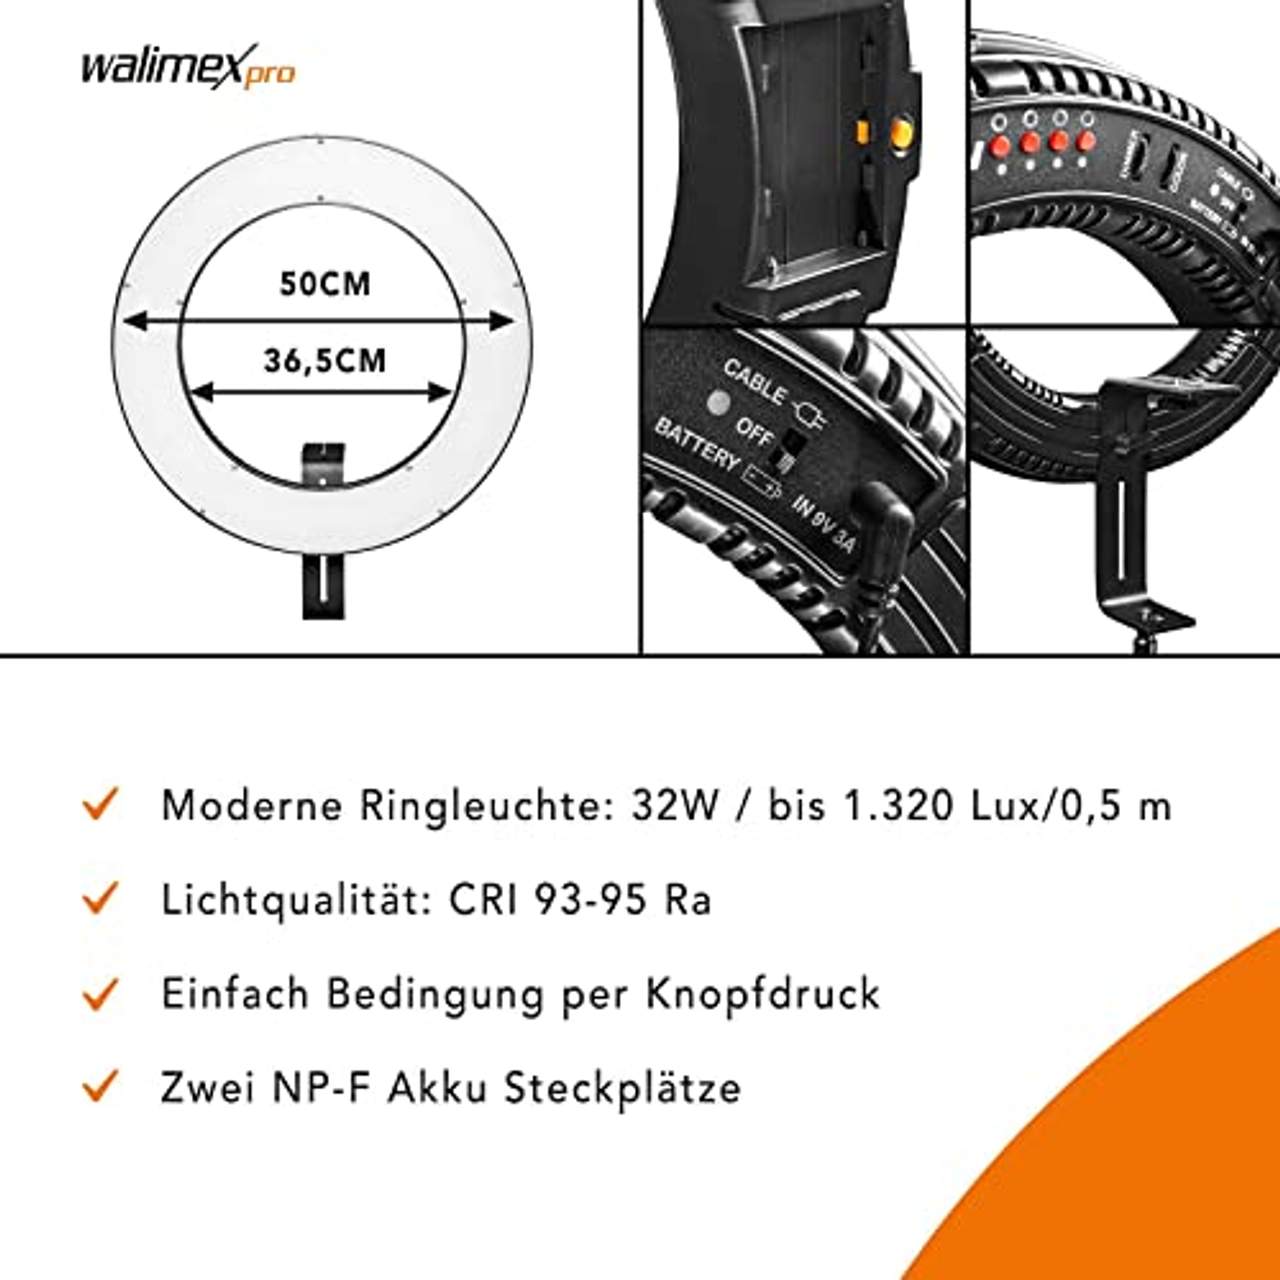 Walimex pro dimmbares LED Ringlicht 32W I Ringleuchte